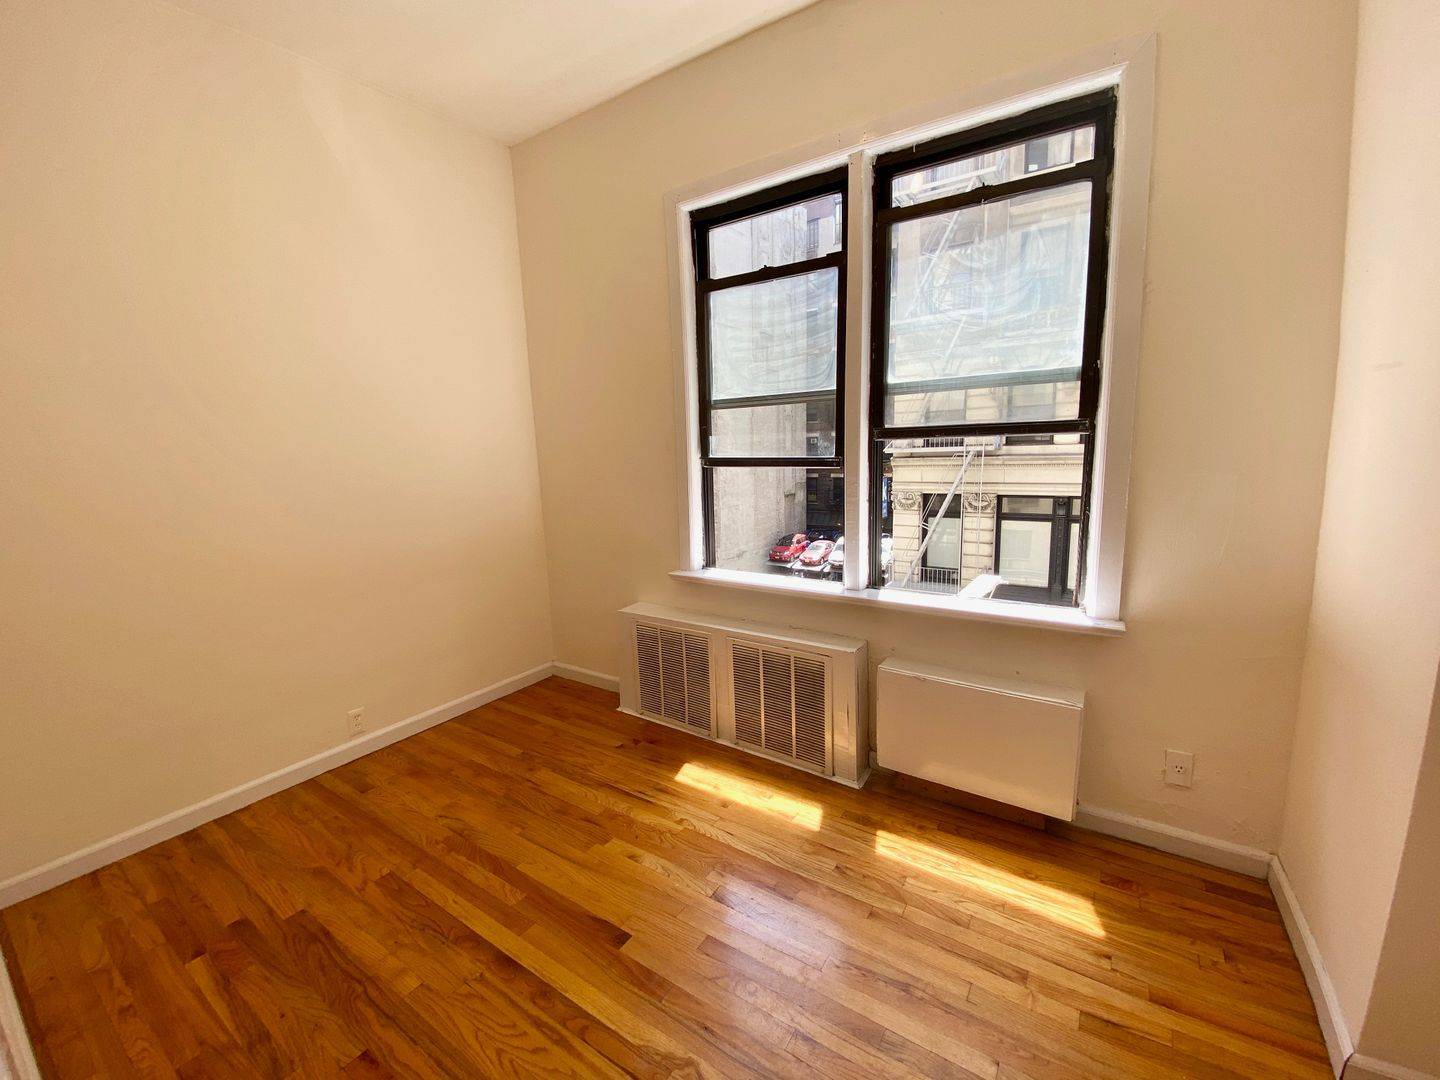 Newly renovated 1 Bedroom with loft area in the heart of Flatiron. 6 train and QR train are within few minutes distance away and plenty of gyms (Equinox, Crunch, NYRC) within 5 min as well.